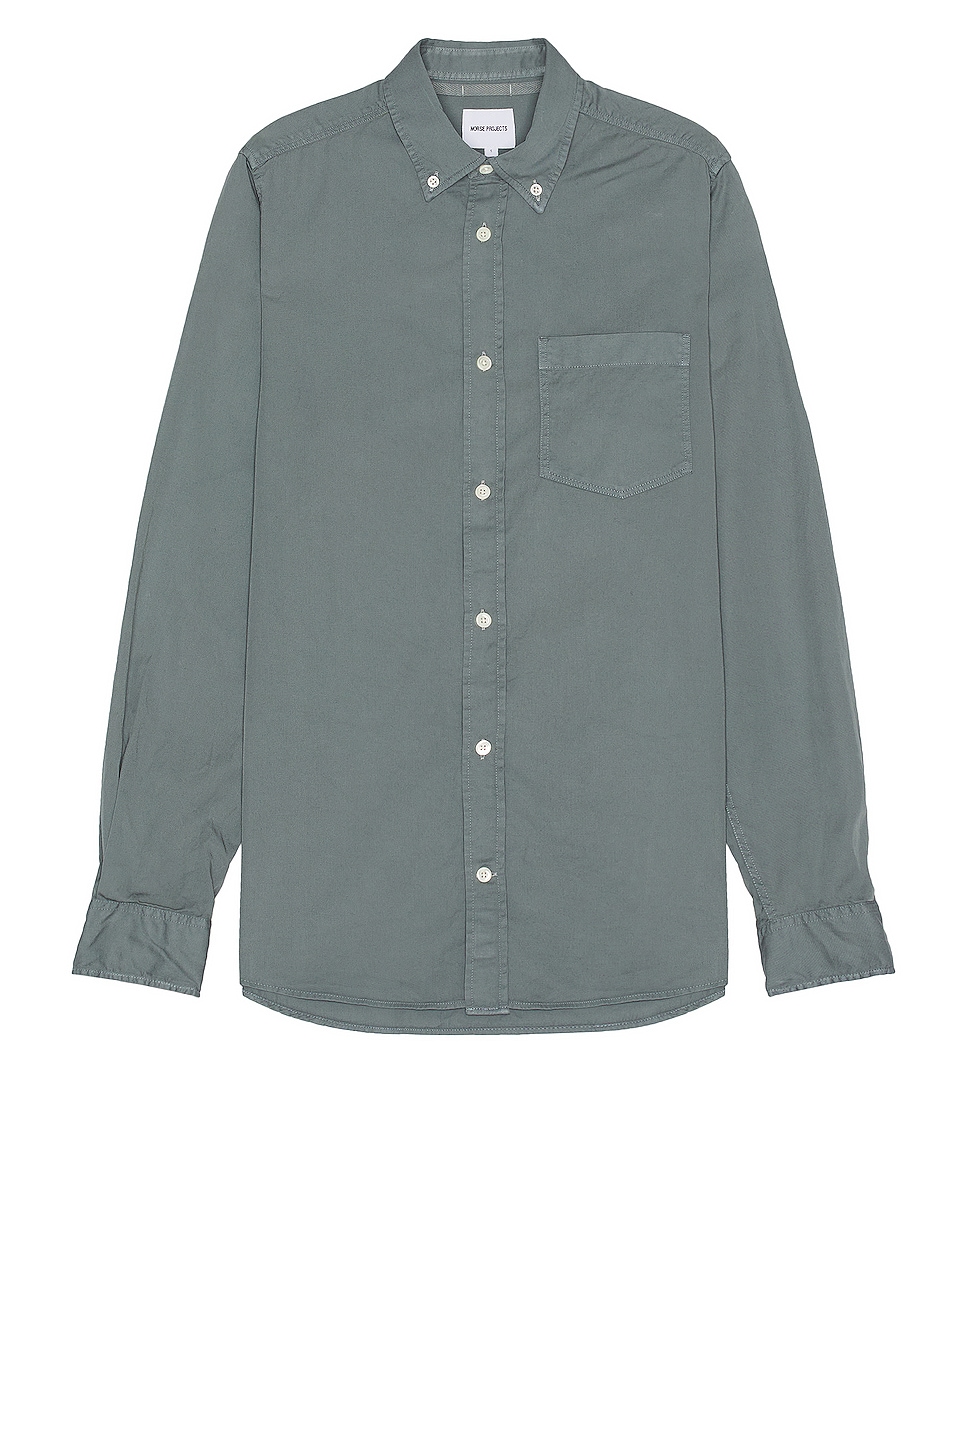 Image 1 of Norse Projects Anton Light Twill Shirt in Light Stone Blue